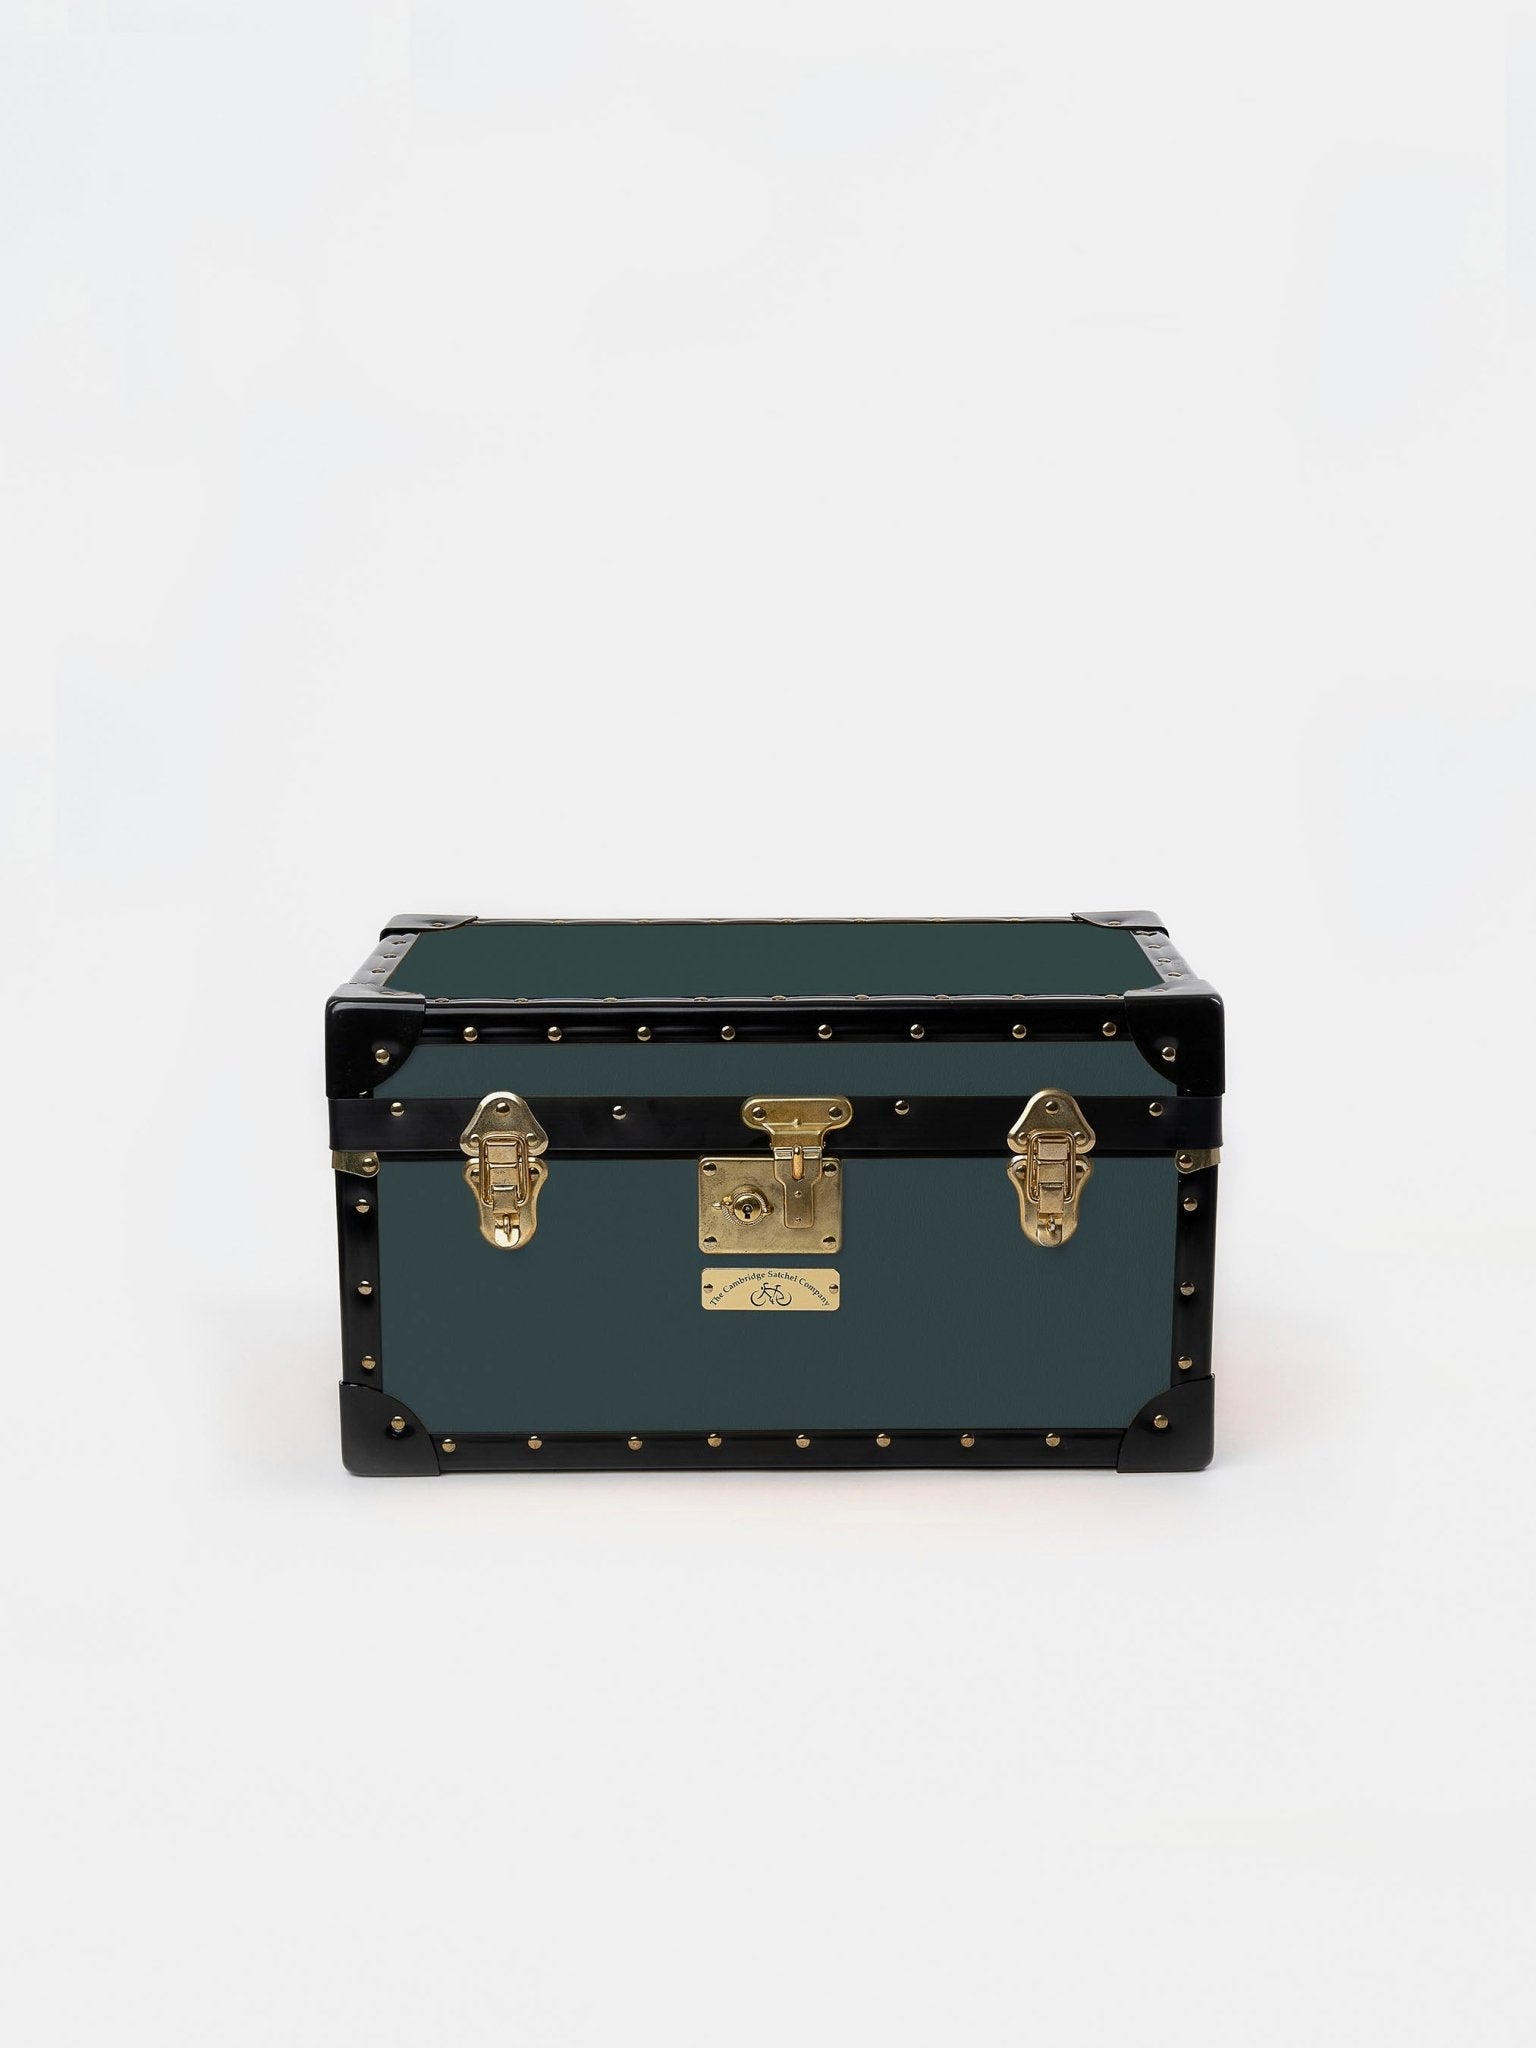 The Treasure Trunk - Forest Green - The Cambridge Satchel Company UK Store